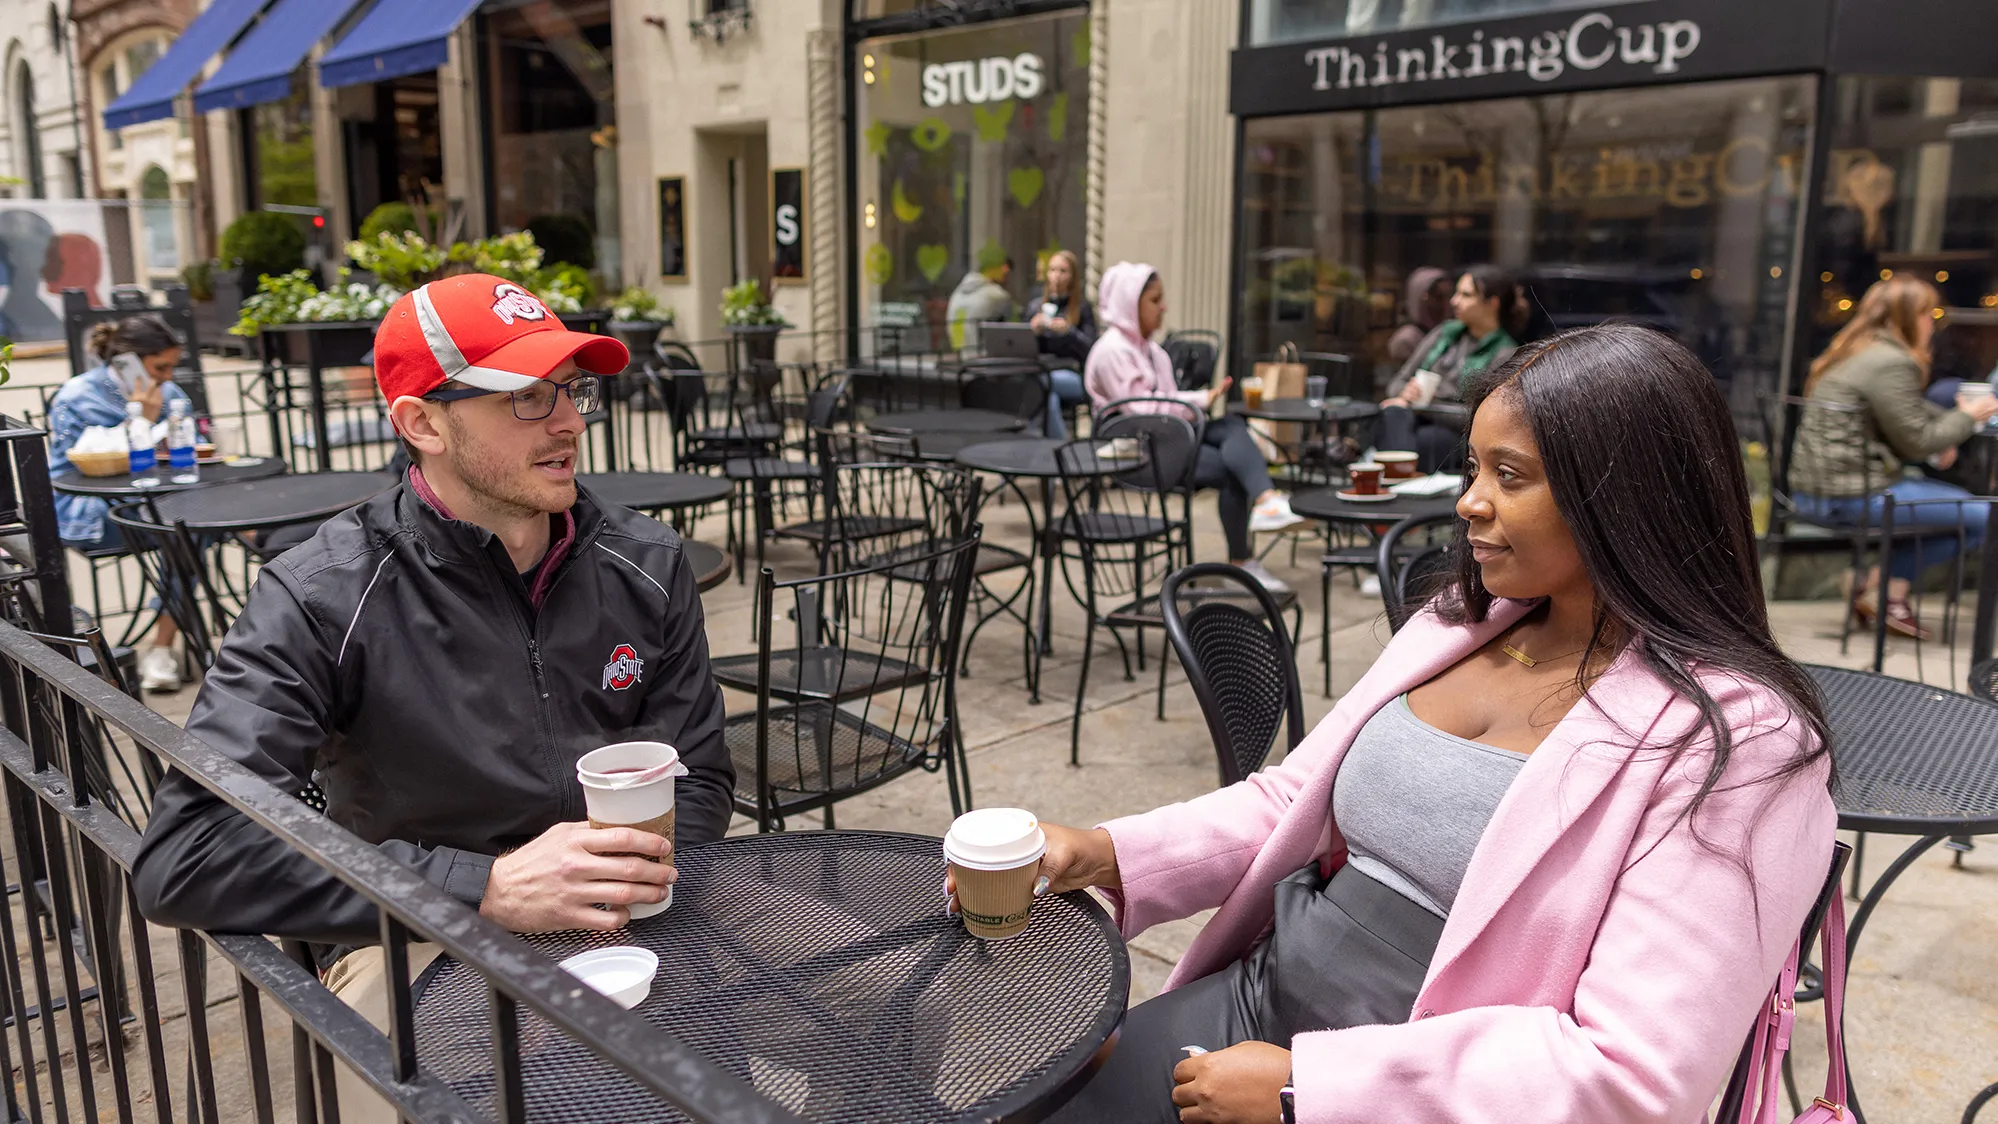 Josh Javor and Dominque McClean talk as they sit a small table in an outdoor dining area on a city block. In the background, the coffee shop sign says, “Thinking Cup.”